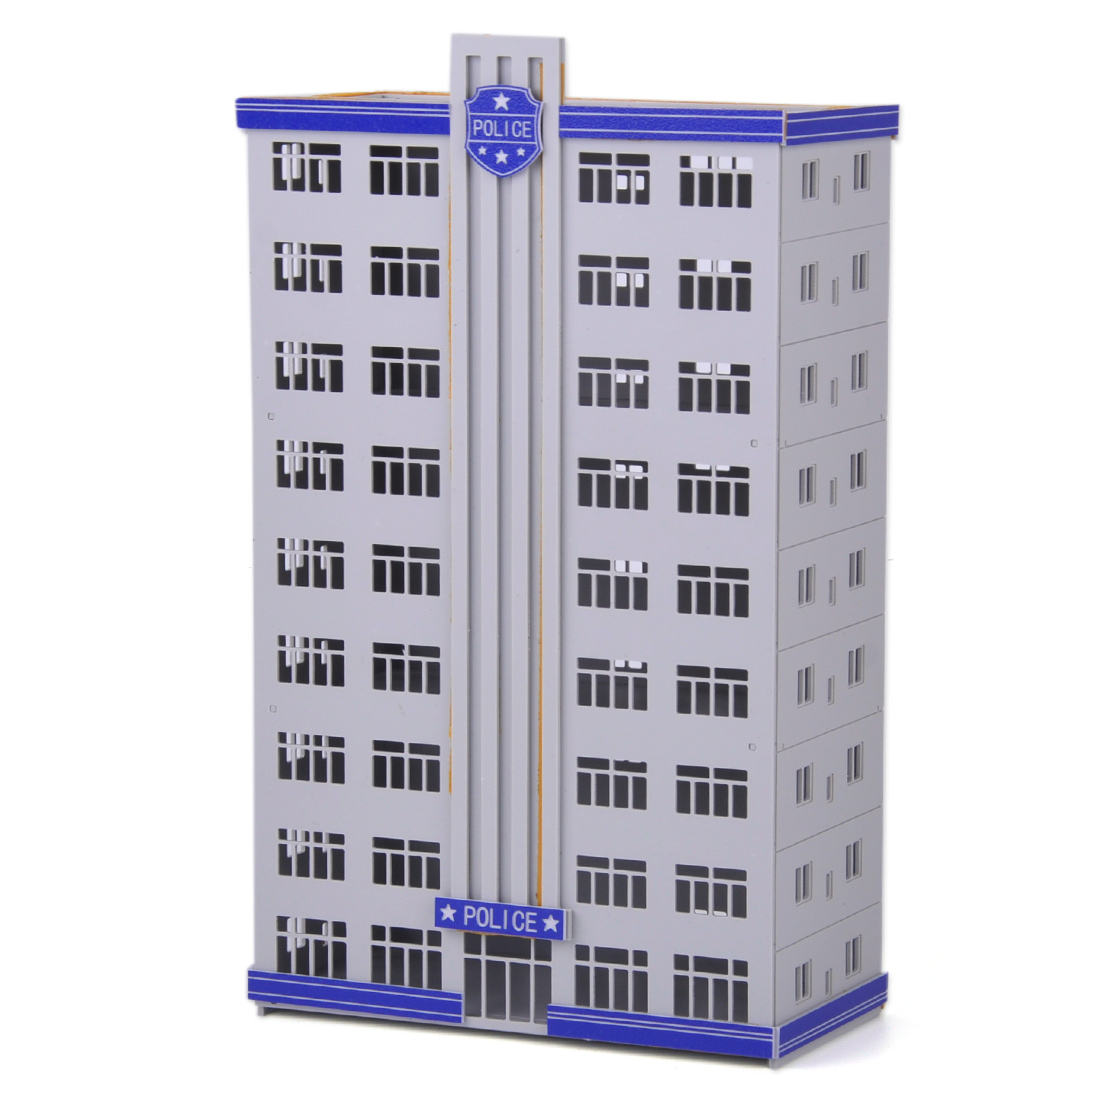 1:150 Scale Railway Police Department Headquarter Model Station Building